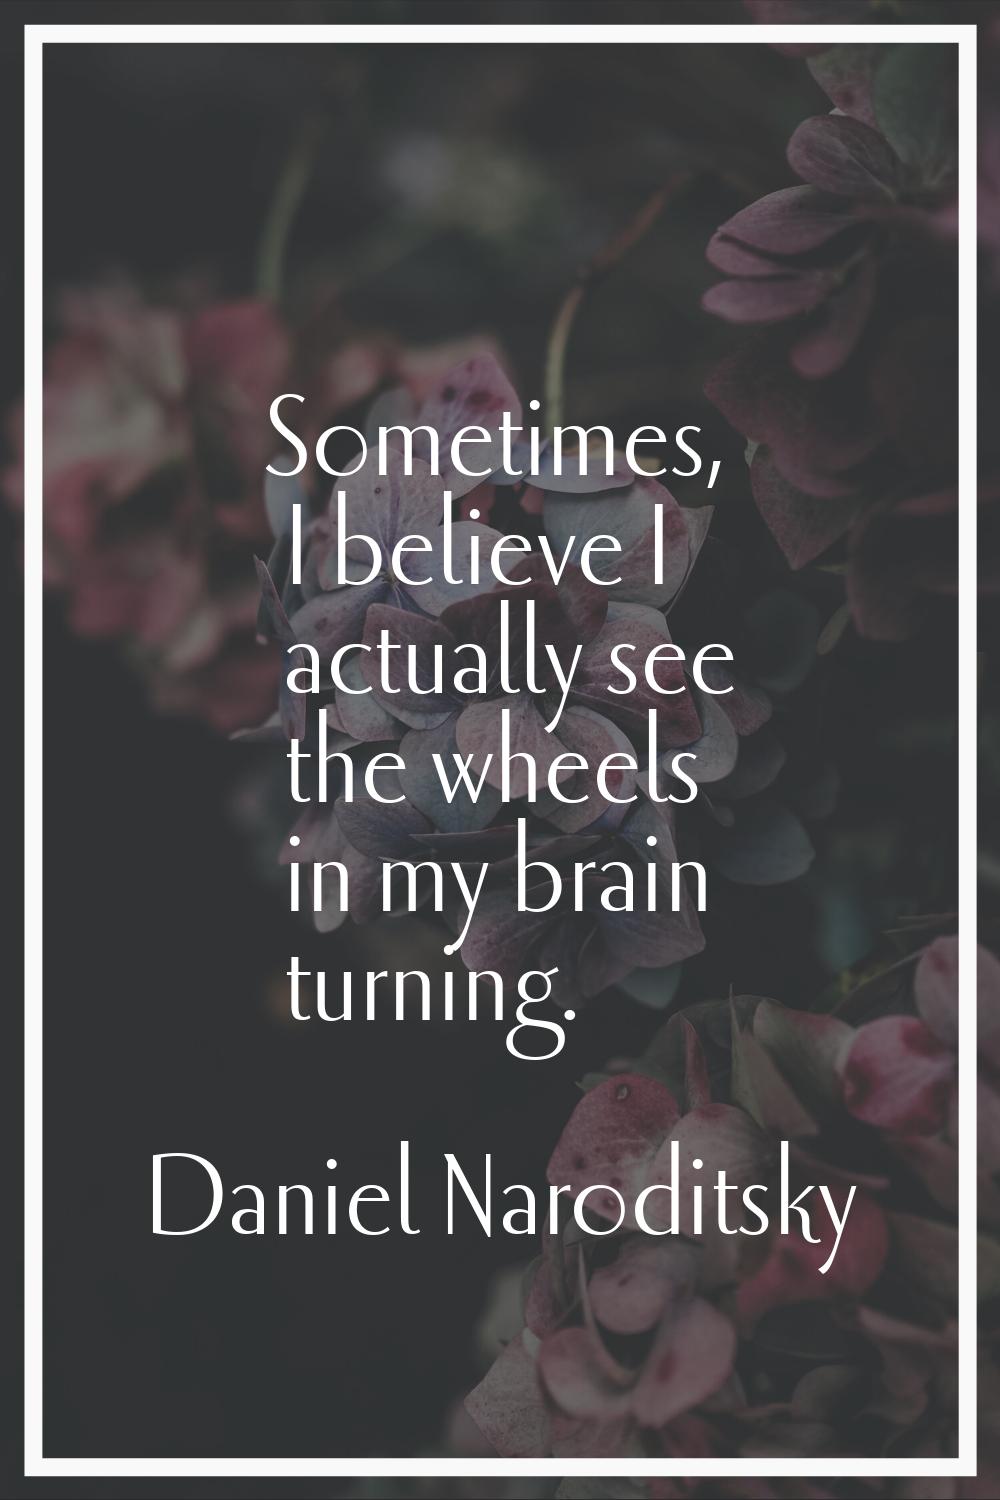 Sometimes, I believe I actually see the wheels in my brain turning.